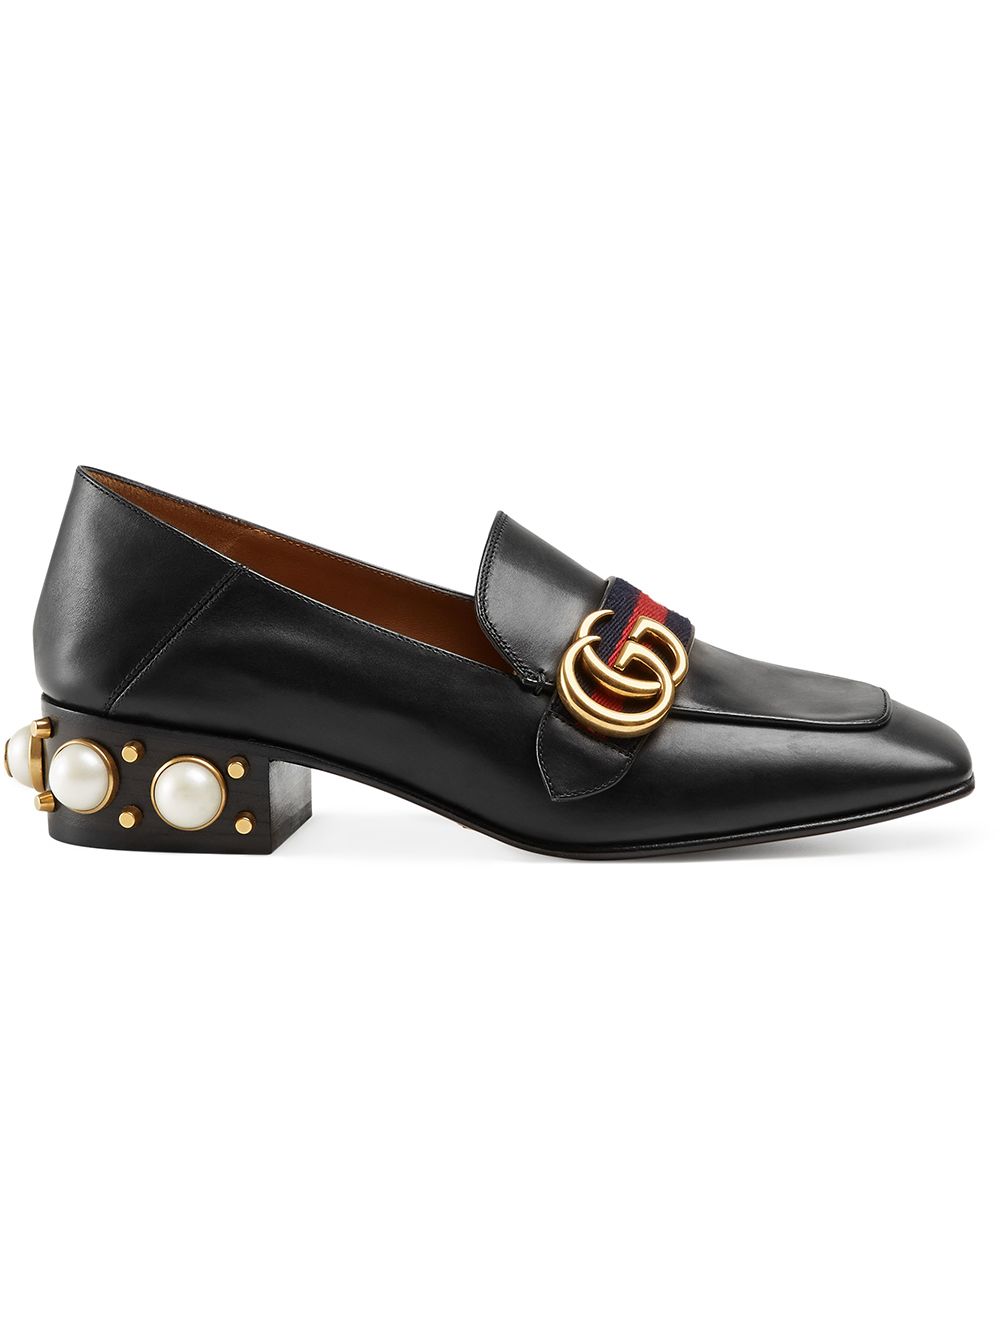 Gucci mid-heel leather loafer 